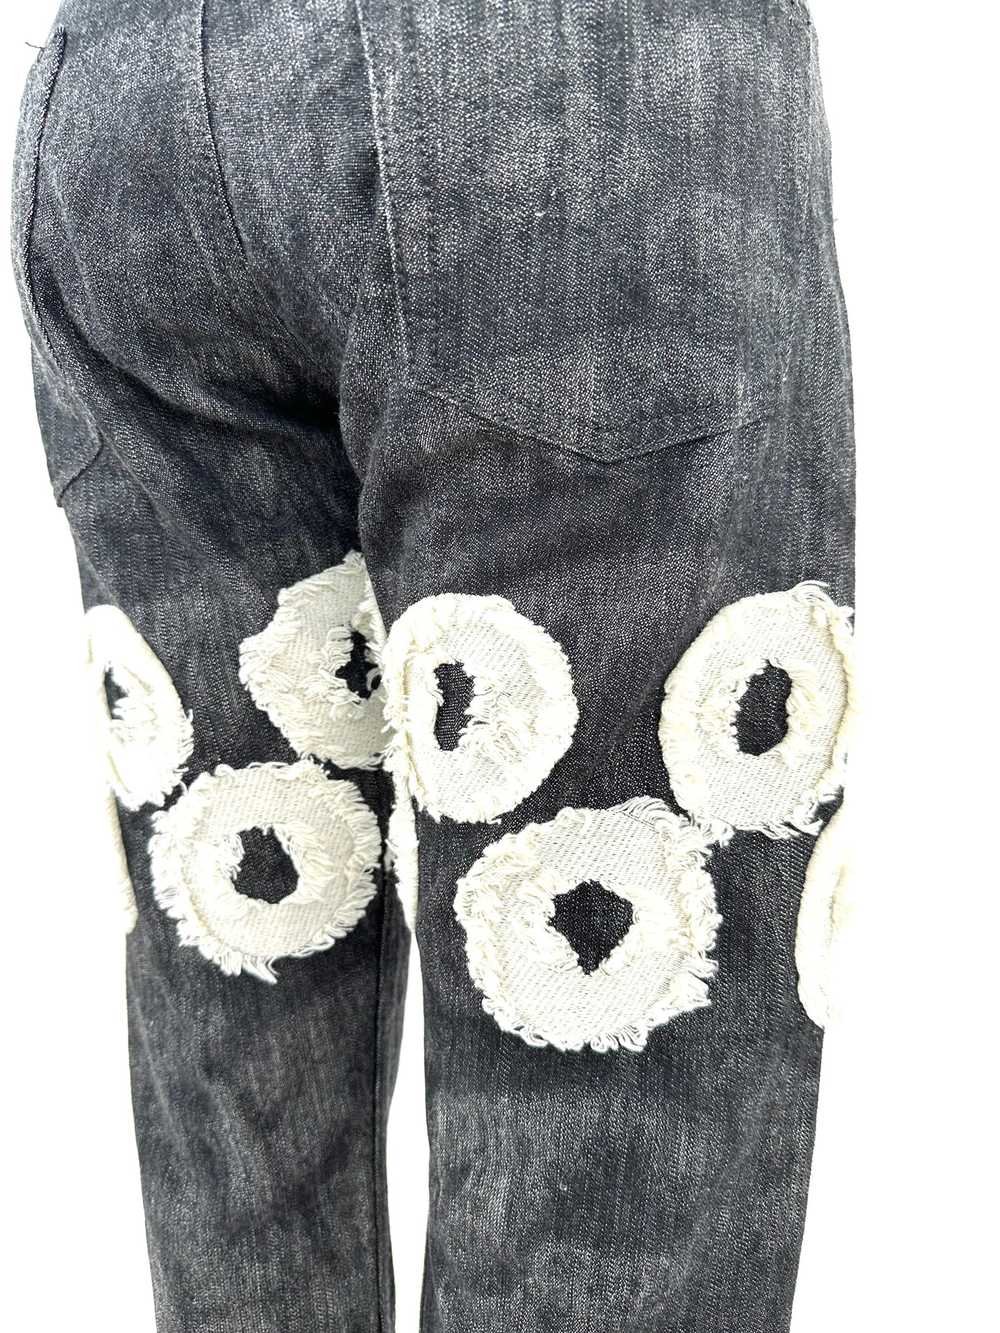 2011 Issey Miyake Archive Embroidered Jeans - image 2